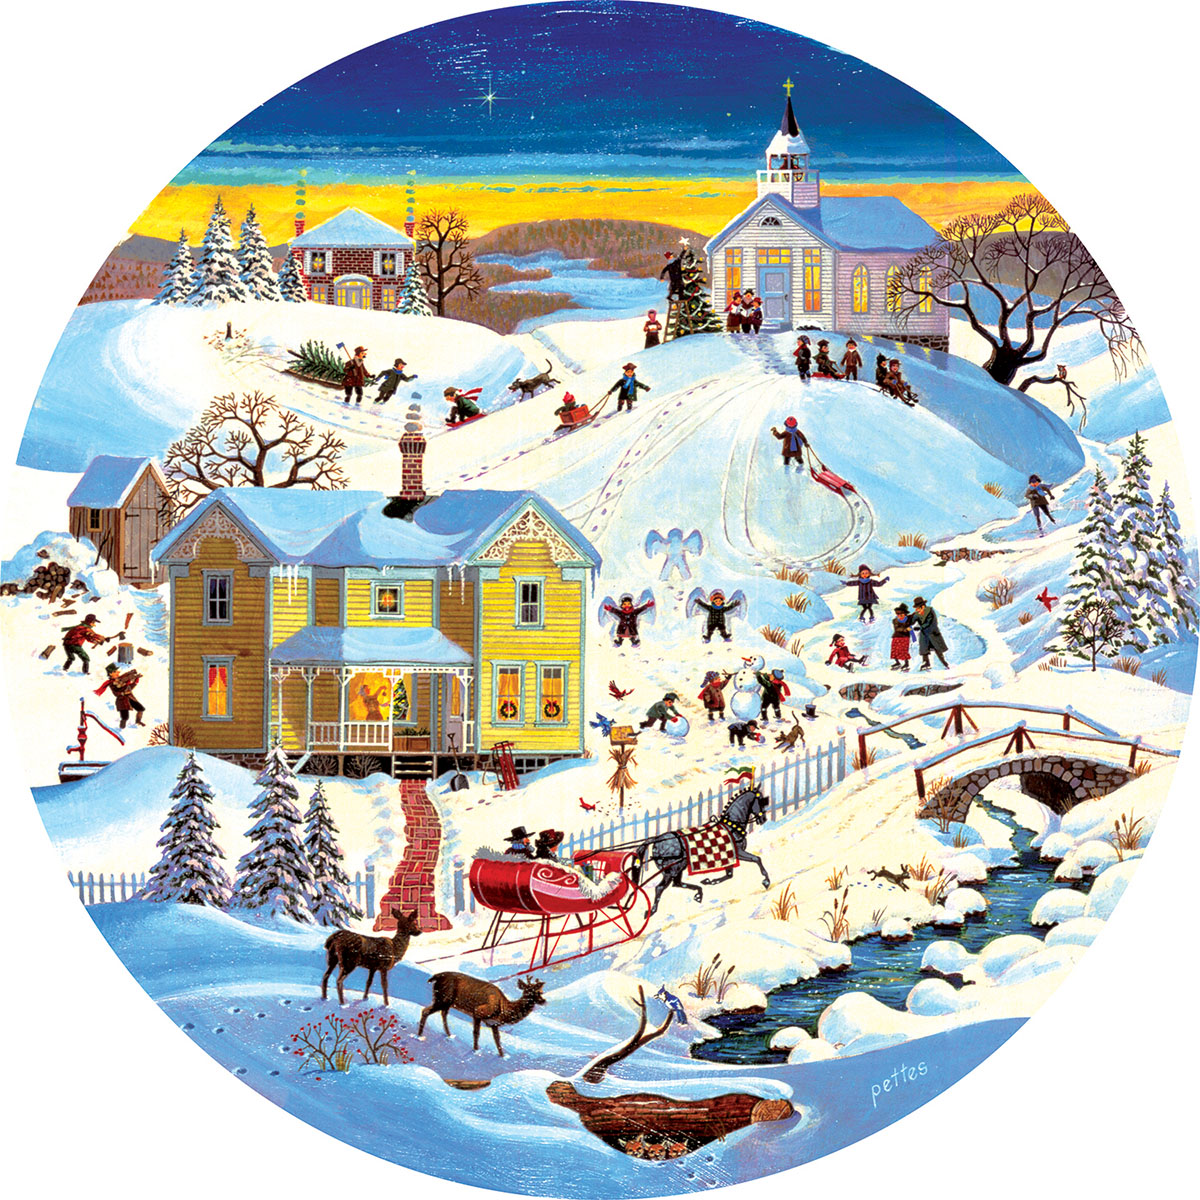 Sledding in the Park New York Jigsaw Puzzle By New York Puzzle Co